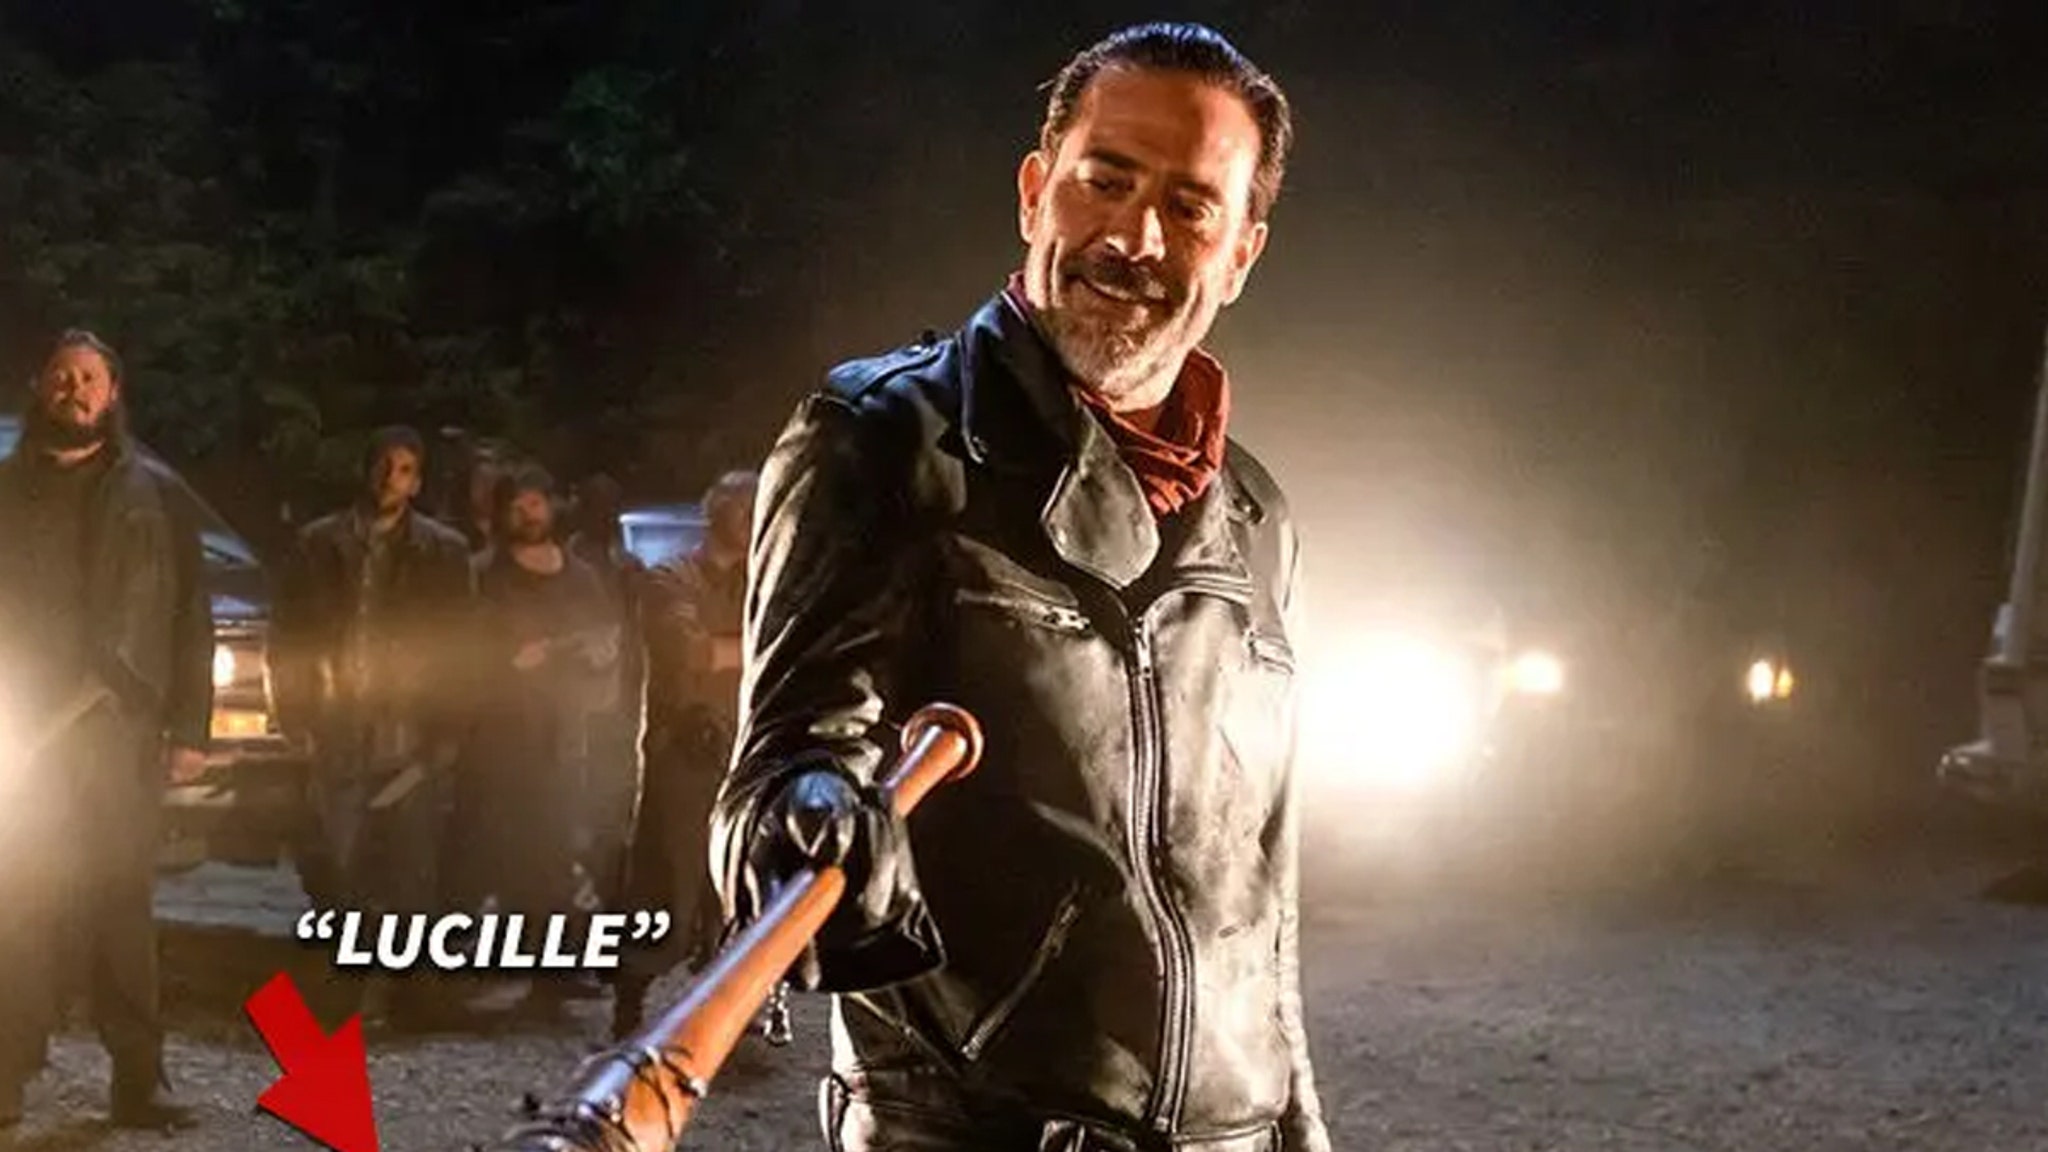 Negan’s Barbed Wire Bat ‘Lucille’ From The Walking Dead Hits Auction Block